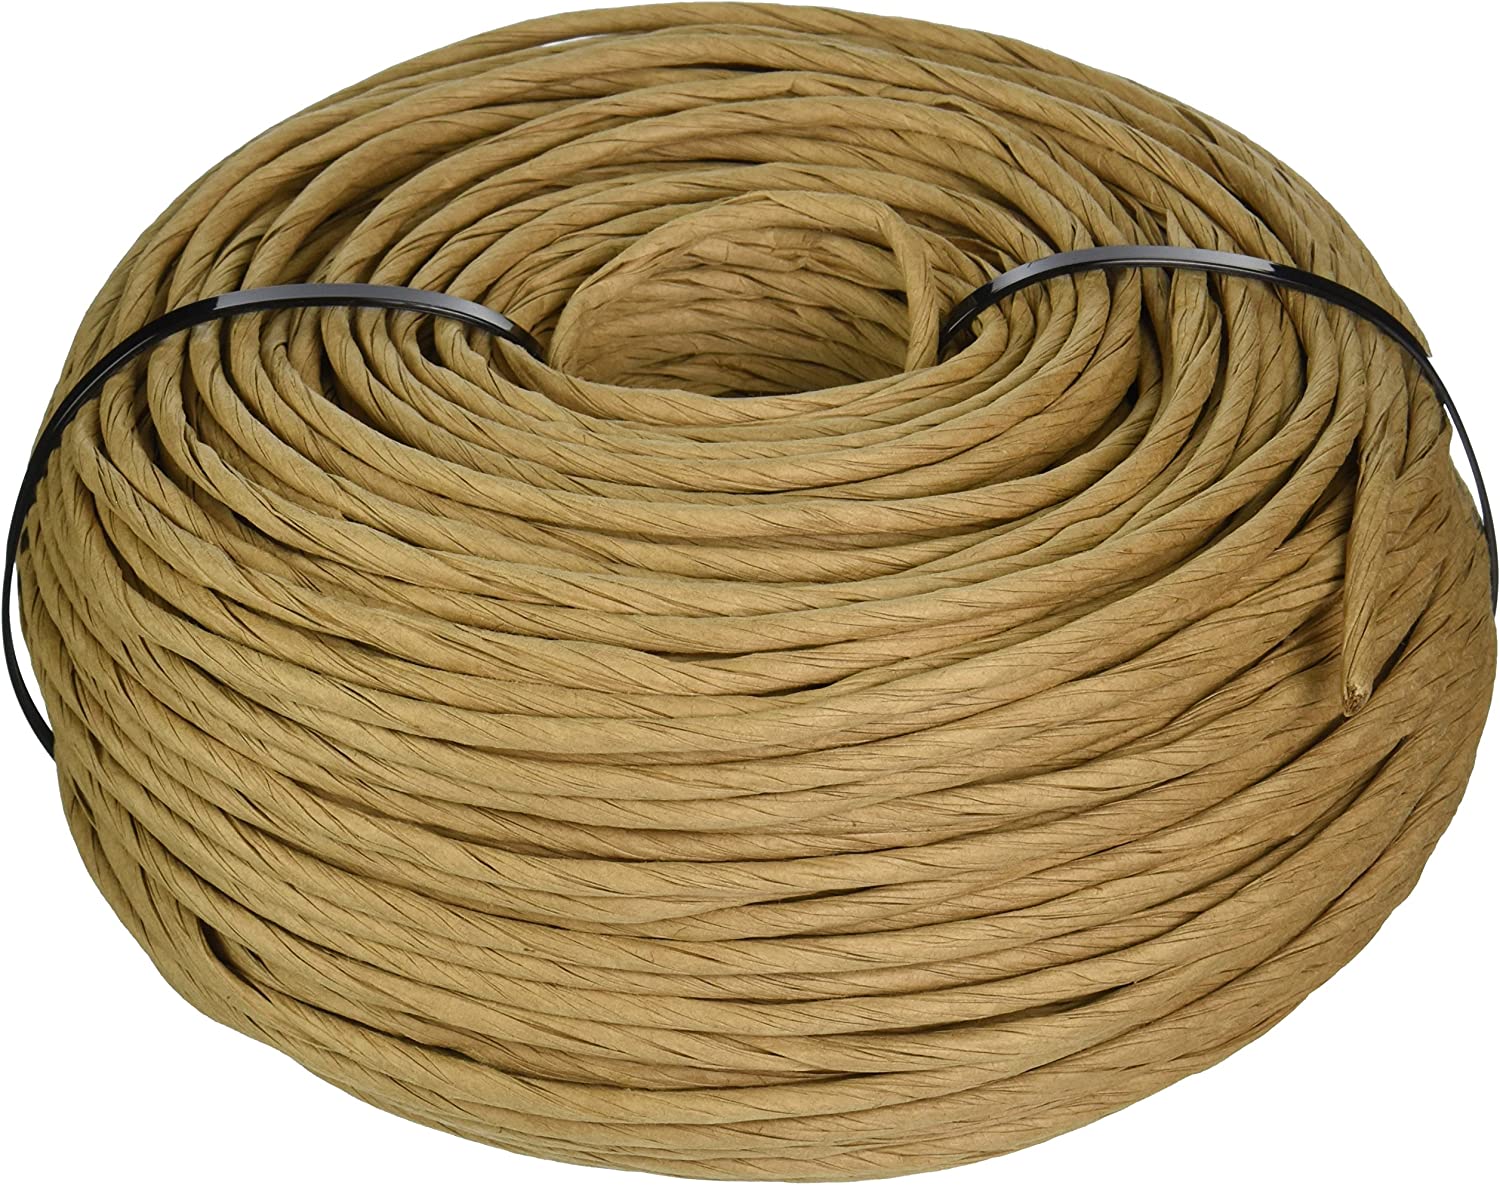 Commonwealth Basket Fibre Rush, 5/32-Inch 2-Pound Coil, Approxmately 210-Feet